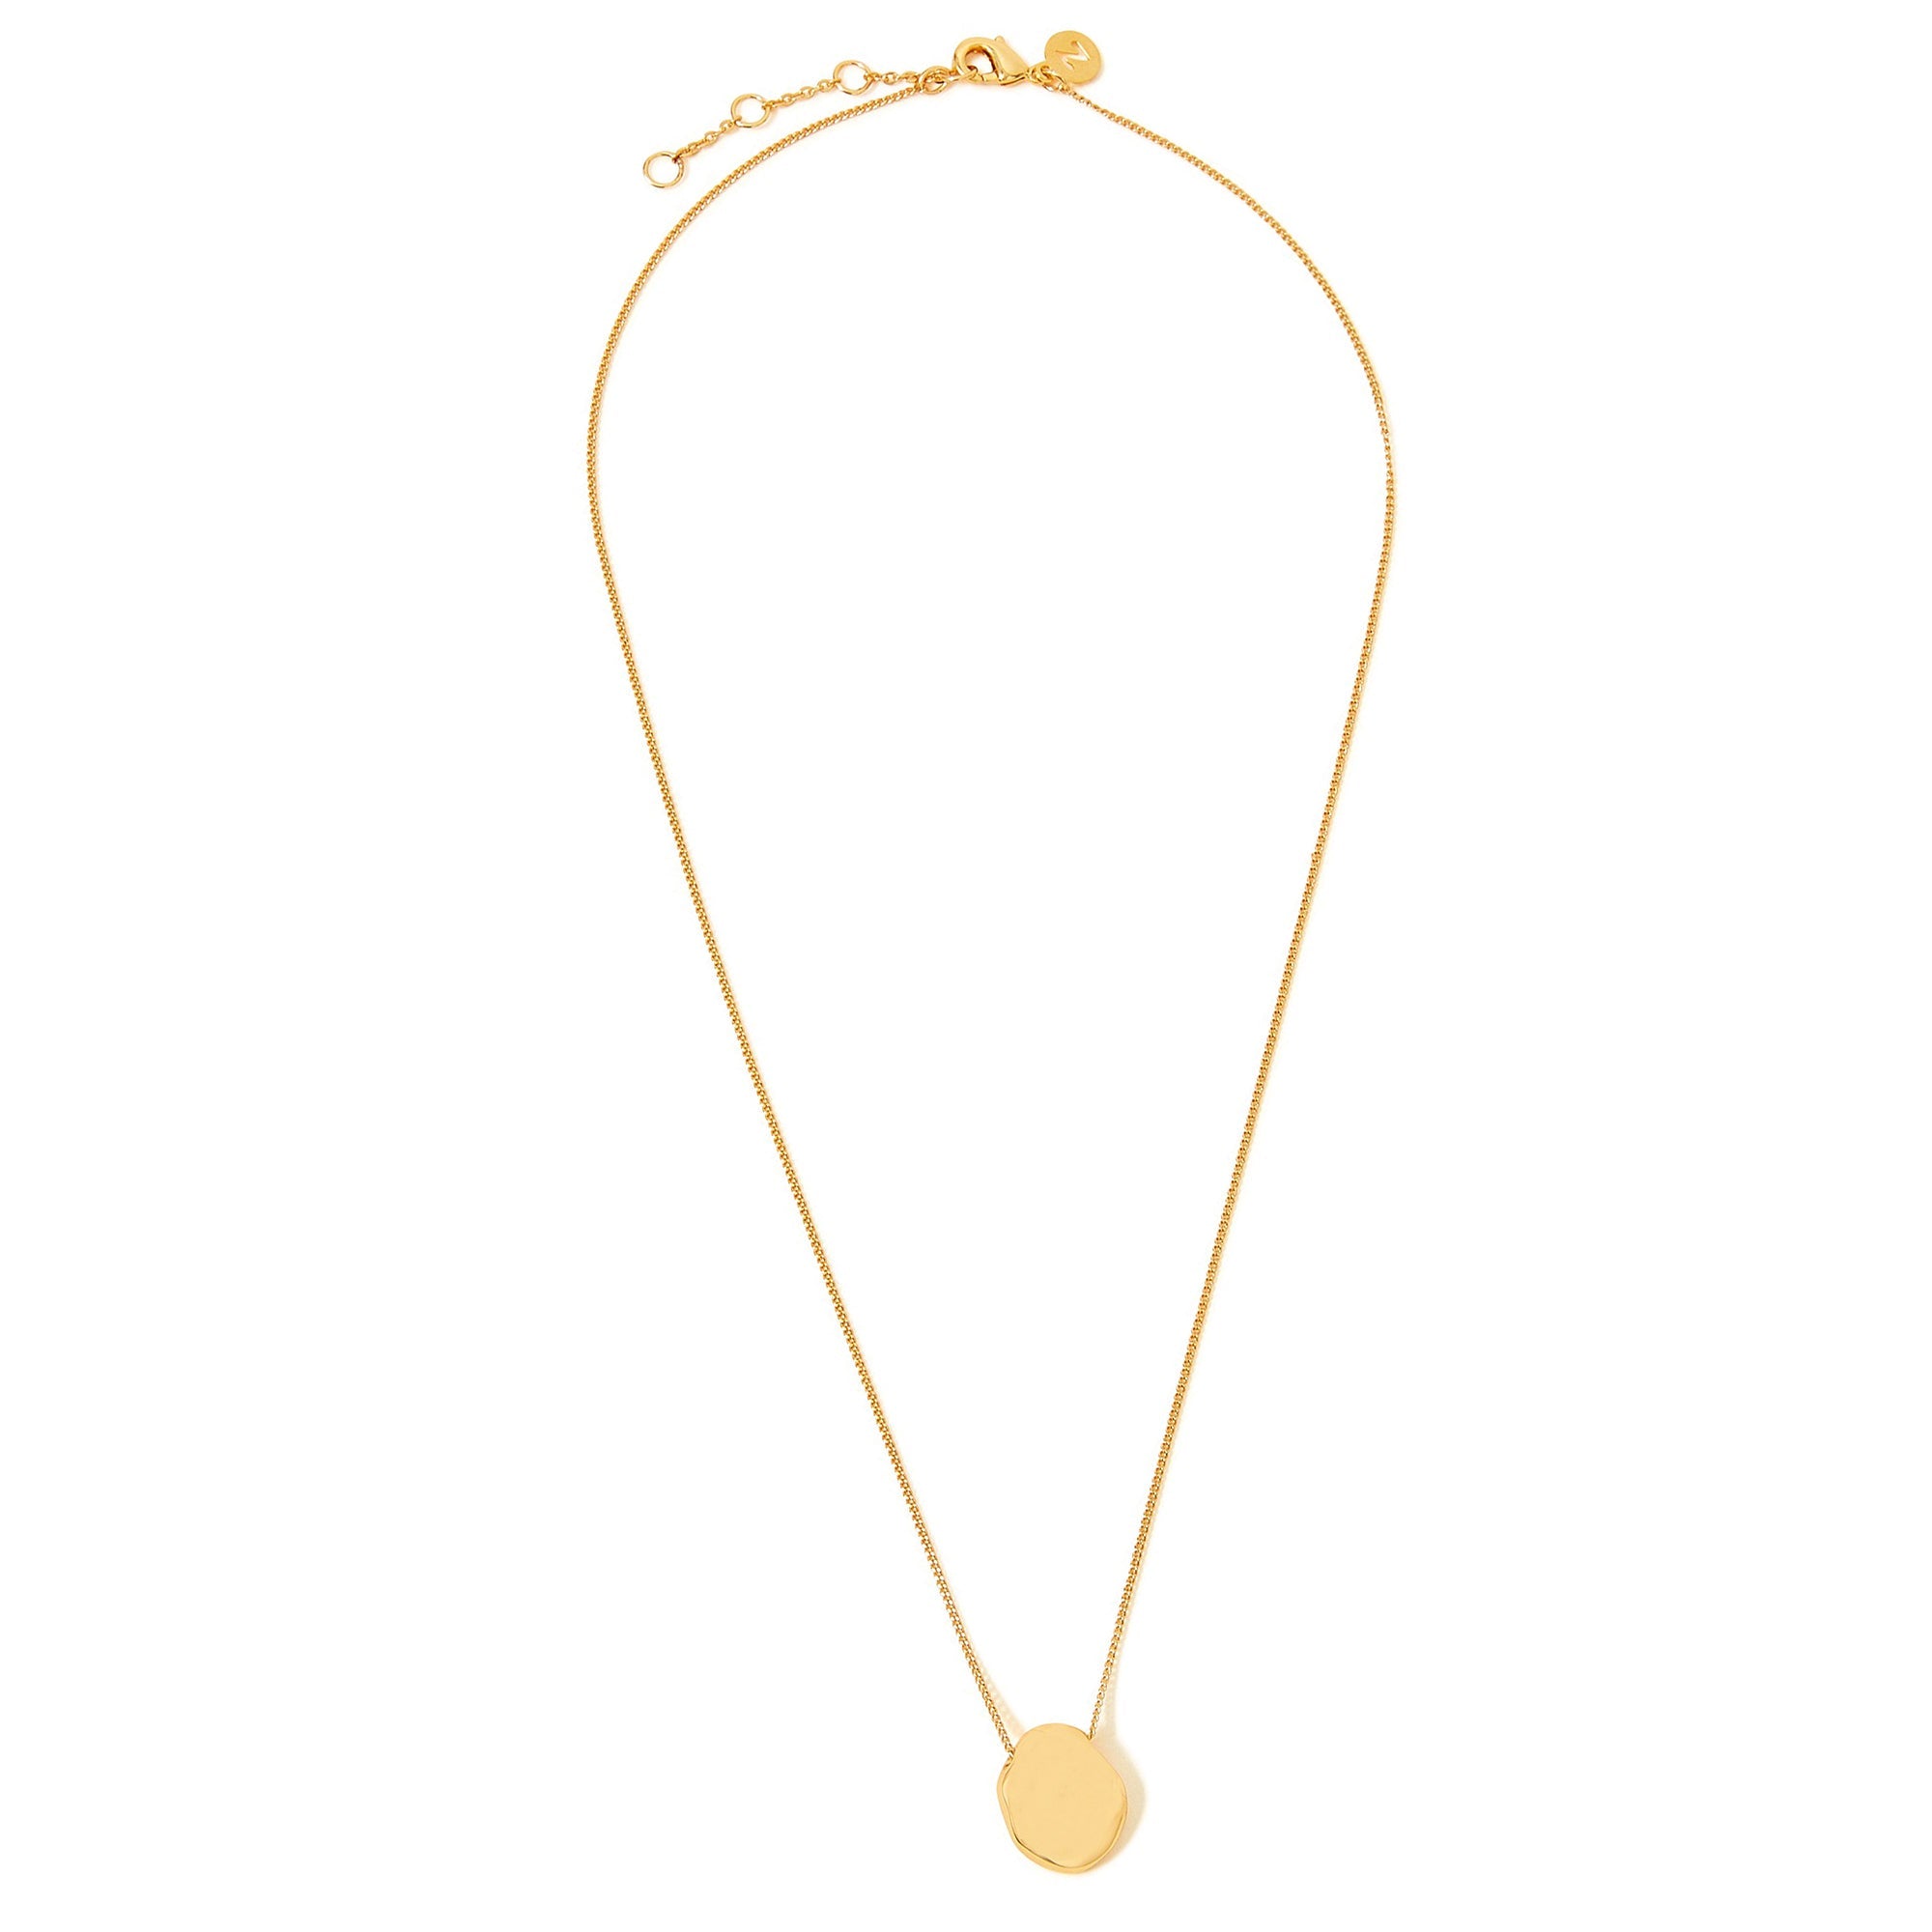 Hammered Circle dainty pendant necklace, 9ct gold – Pearls & Pomegranates